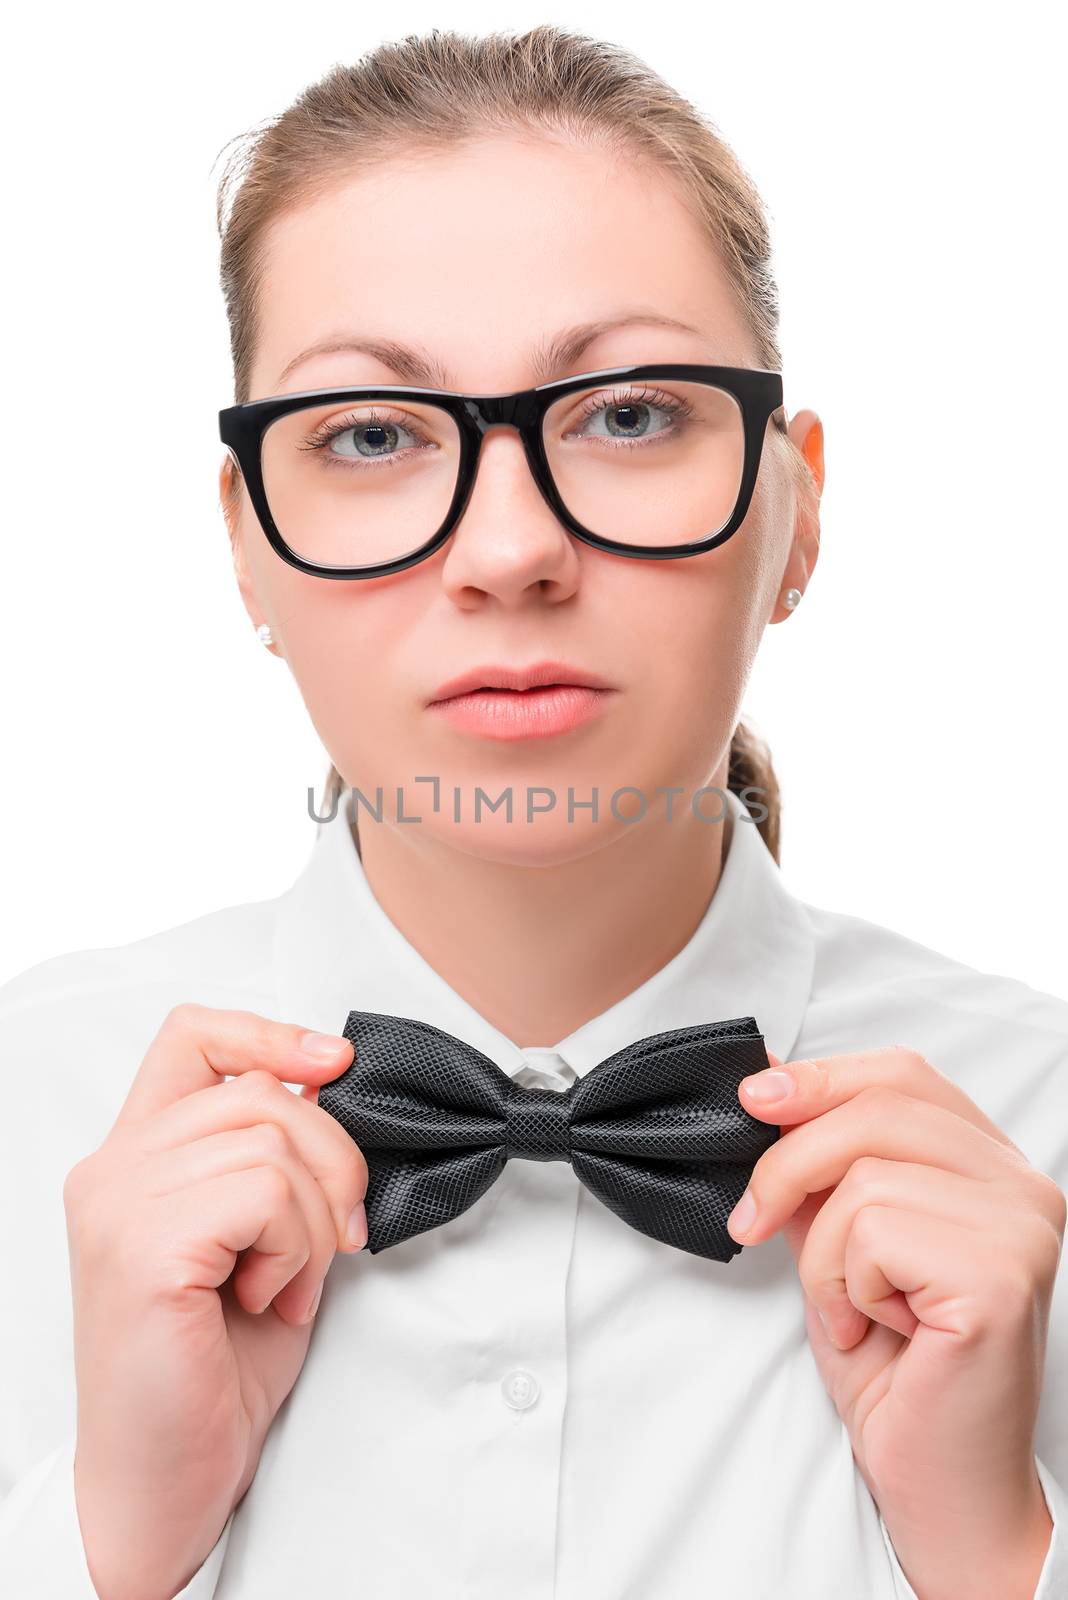 woman with glasses and a butterfly close-up portrait on a white background